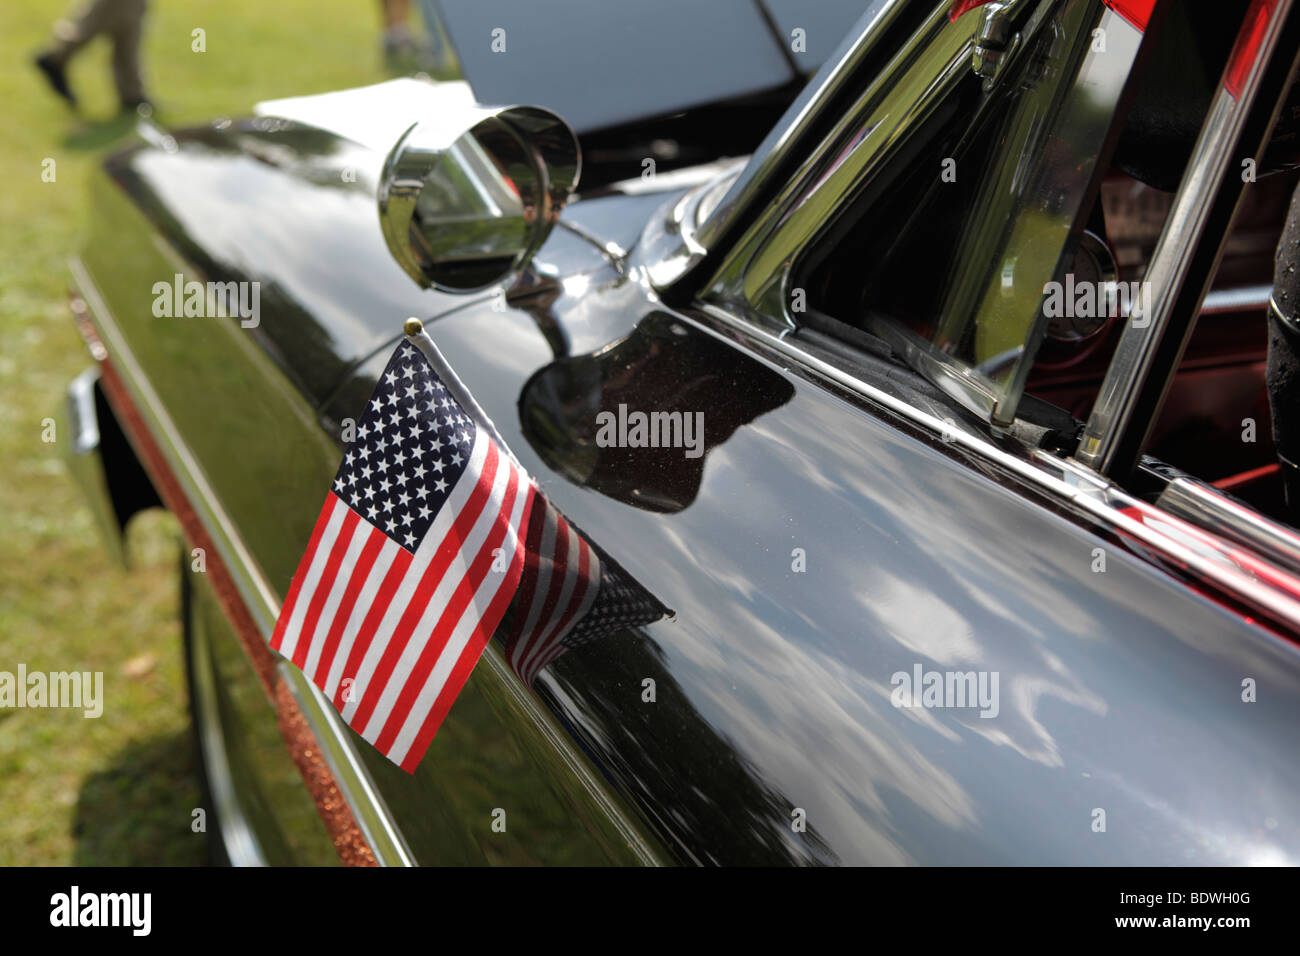 1964 Ford Galaxie 500. steering wheel and american flag. Smithville, Indiana car show. Stock Photo